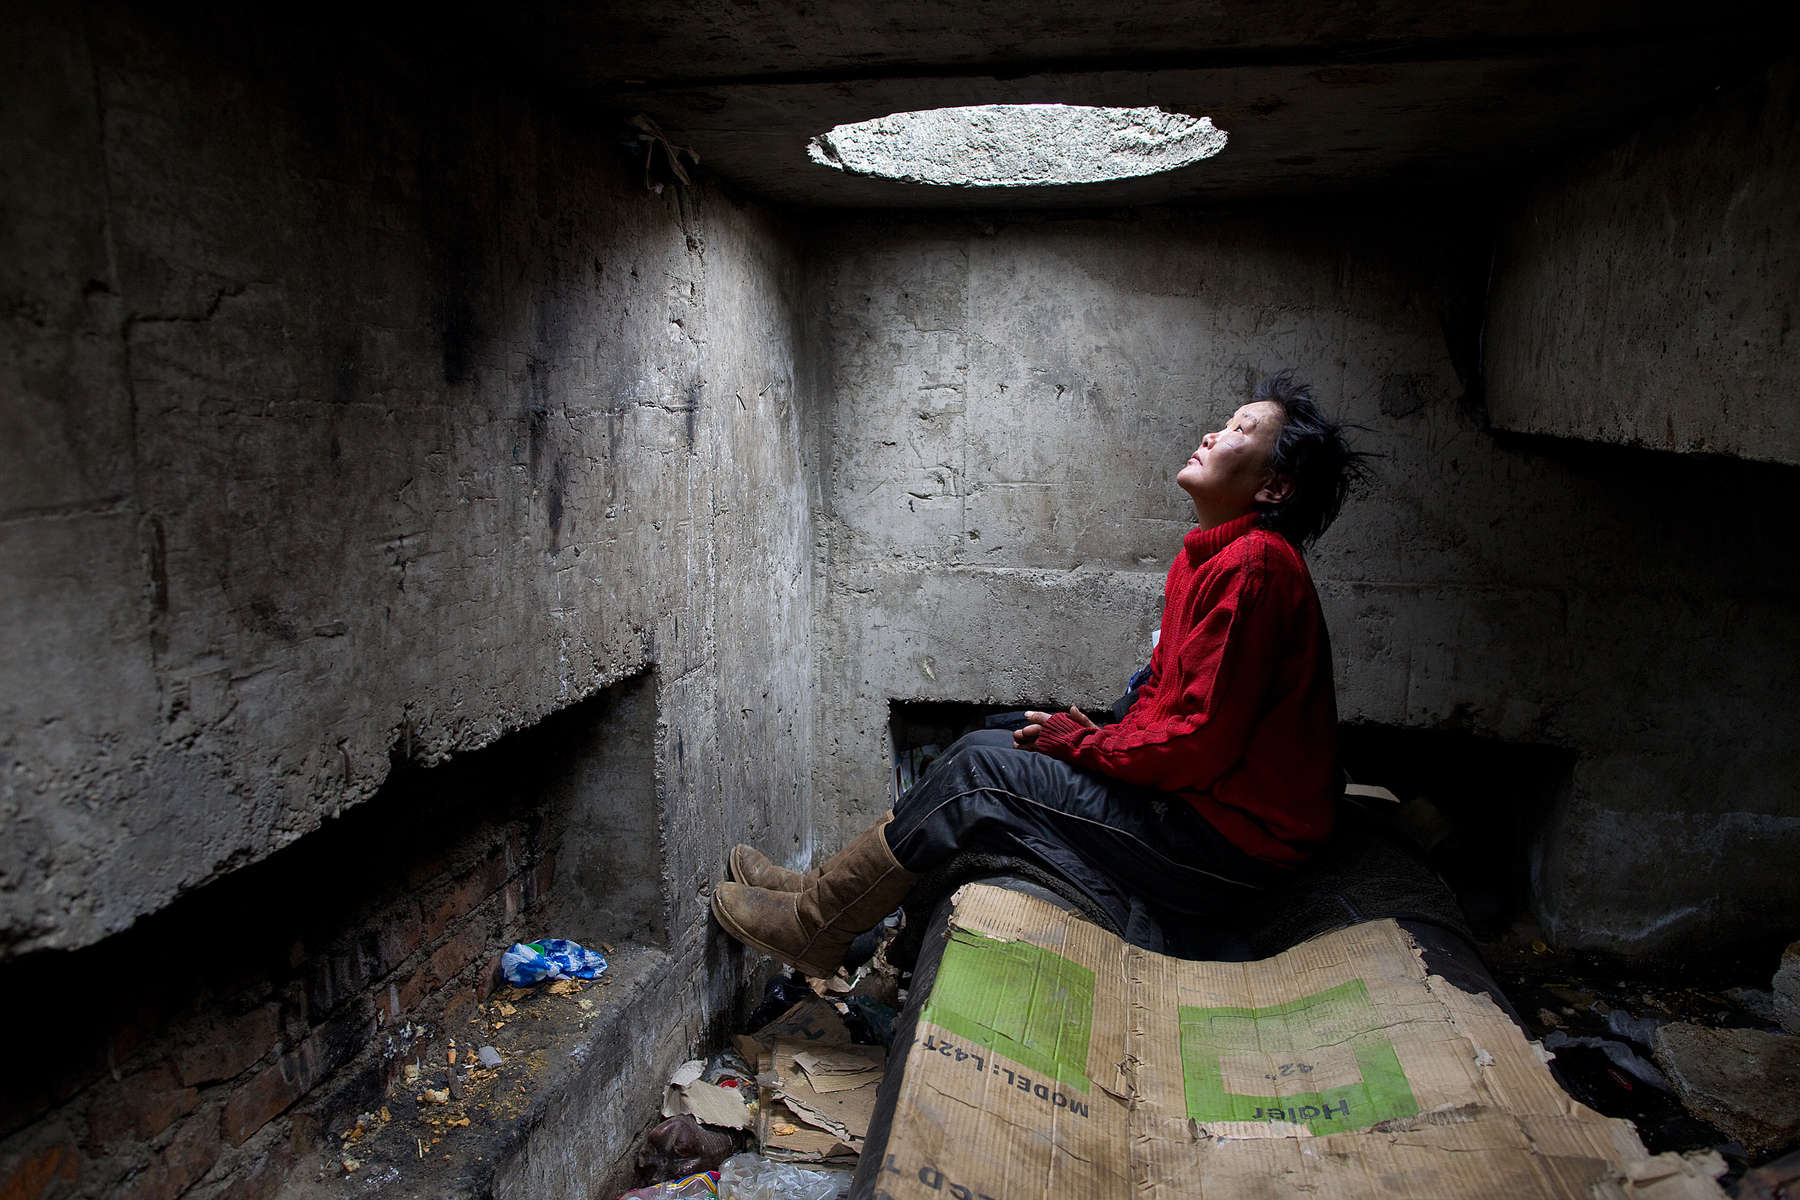 ULAAN BAATAR, MONGOLIA-MARCH 13 : Erdenetsetseg,36,  sits on a water pipe inside the sewer filled with garbage where she lives  March13, 2010  in Ulaan Baatar, Mongolia. Erdenetsetseg moved to the capitol city from a province five years ago, without work she collects cans and bottles to make enough money to buy a little food and her daily fix of vodka. Since 70 years of communist rule ended in 1990, Mongolia has become one of the most pro-business countries. While economic reforms have brought prosperity to Ulaan Baatar, there still widespread unemployment, some used to work in the now defunct state industries. Approximately over 35% of Mongolians live below the poverty line, many unable to buy basic food needed to survive. Social problems include depression, alcohol abuse, domestic violence and crime. Mongolia suffers with a very high number of alcoholics, all consuming cheap Mongolian vodka that is readily available to the poor and the unemployed, Many Mongolians have immigrated to the capitol city from the far away provinces seeking employment.  For the homeless during the winter this means extreme hardship, for some homeless living in the sewers means warmth verses dealing with temperatures dropping as low as -25C mid- Winter. This year Mongolia has experienced the worst winter in 30 years. (Photo by Paula Bronstein /Getty Images)